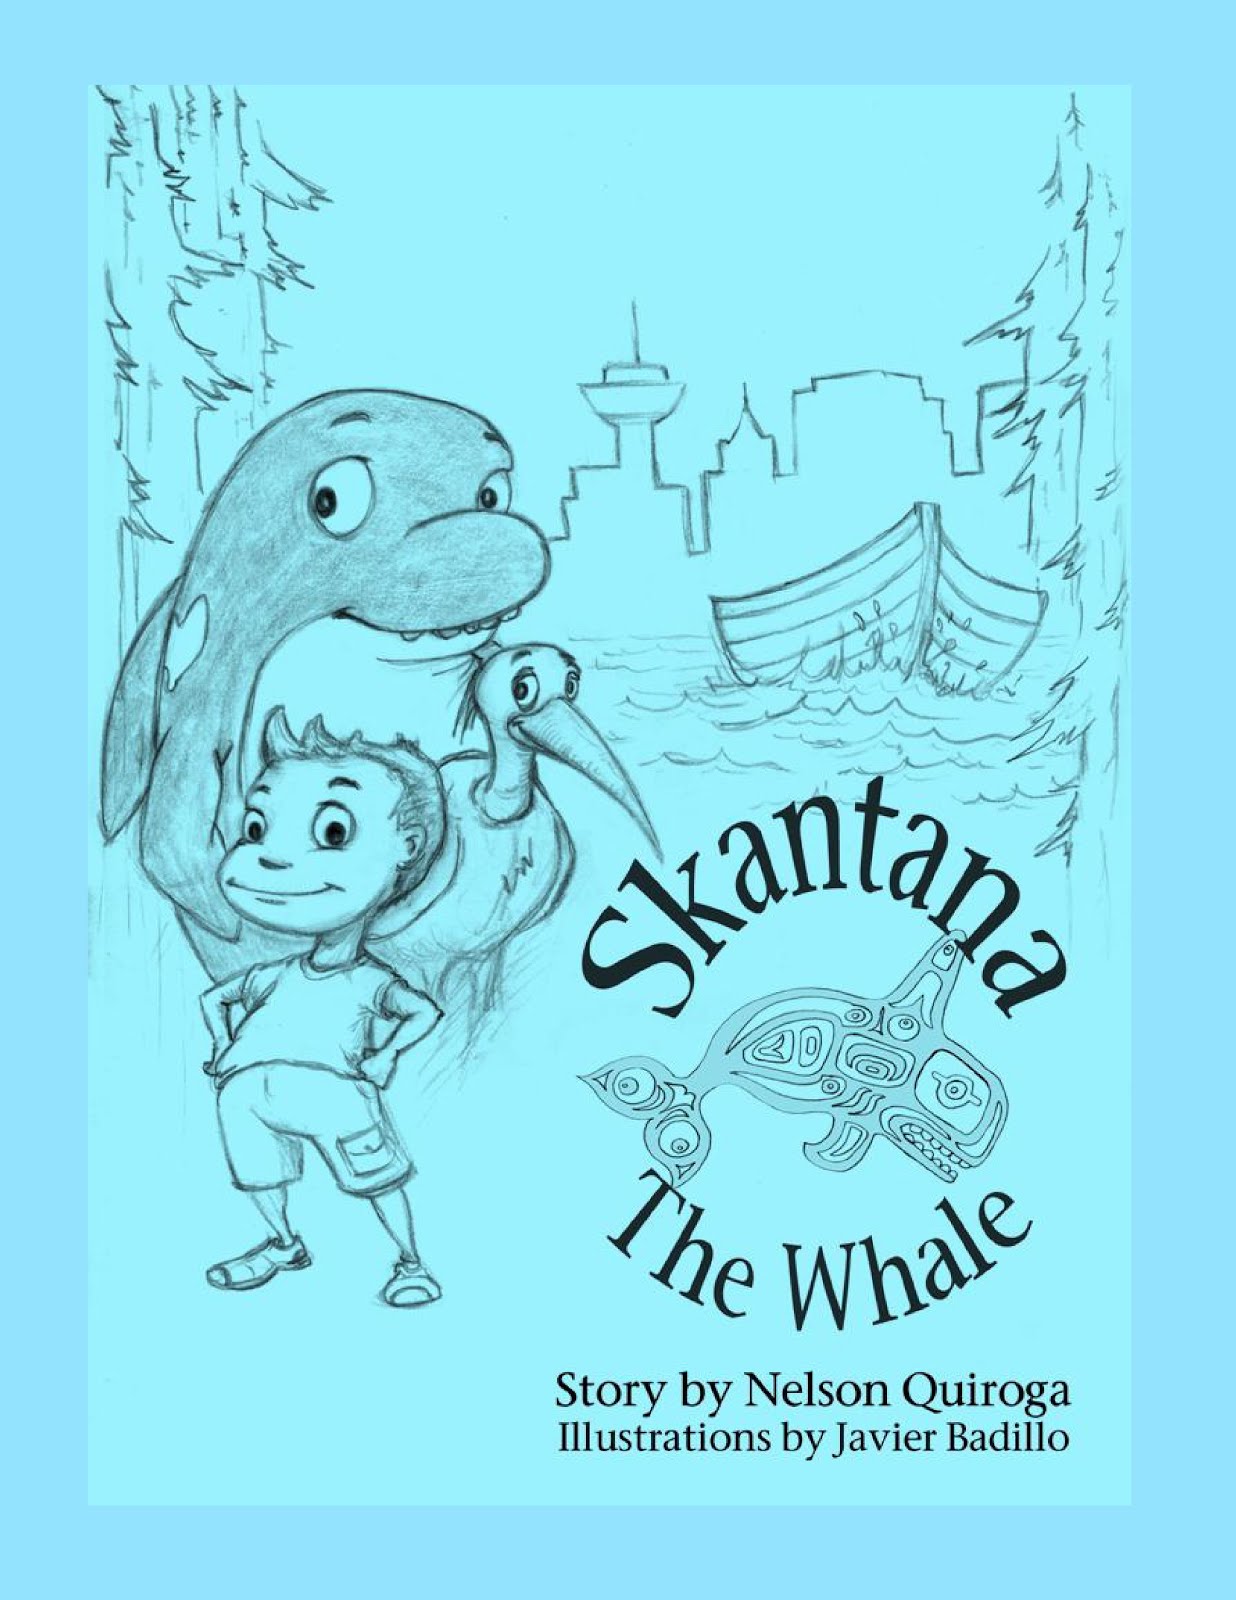 "Skantana The Whale" by Nelson Quiroga available at Amazon Books click on image to order